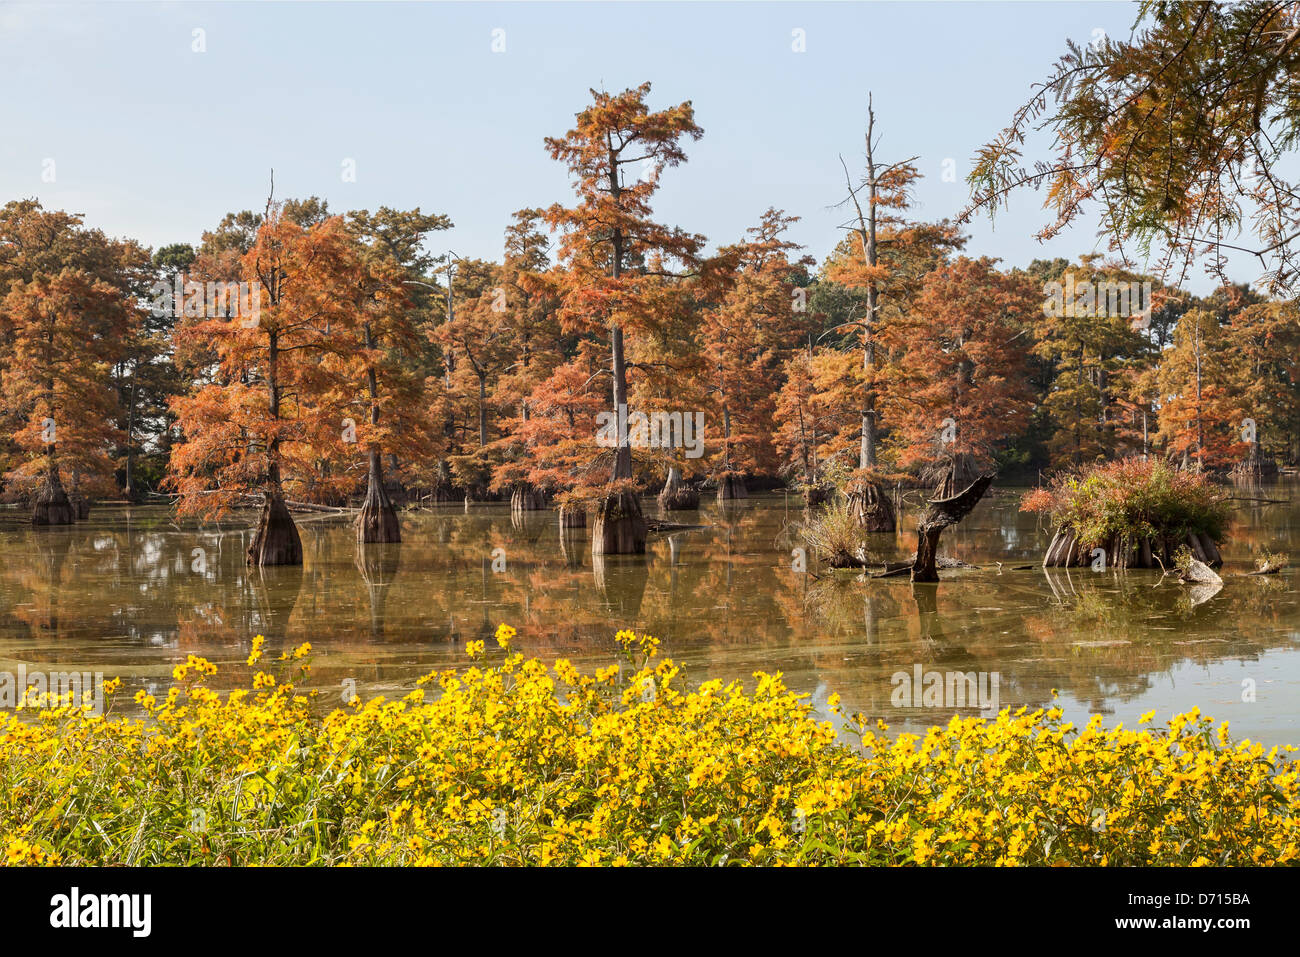 USA, Arkansas, Galloway, View of cypress swamp and wildflowers during autumn Stock Photo